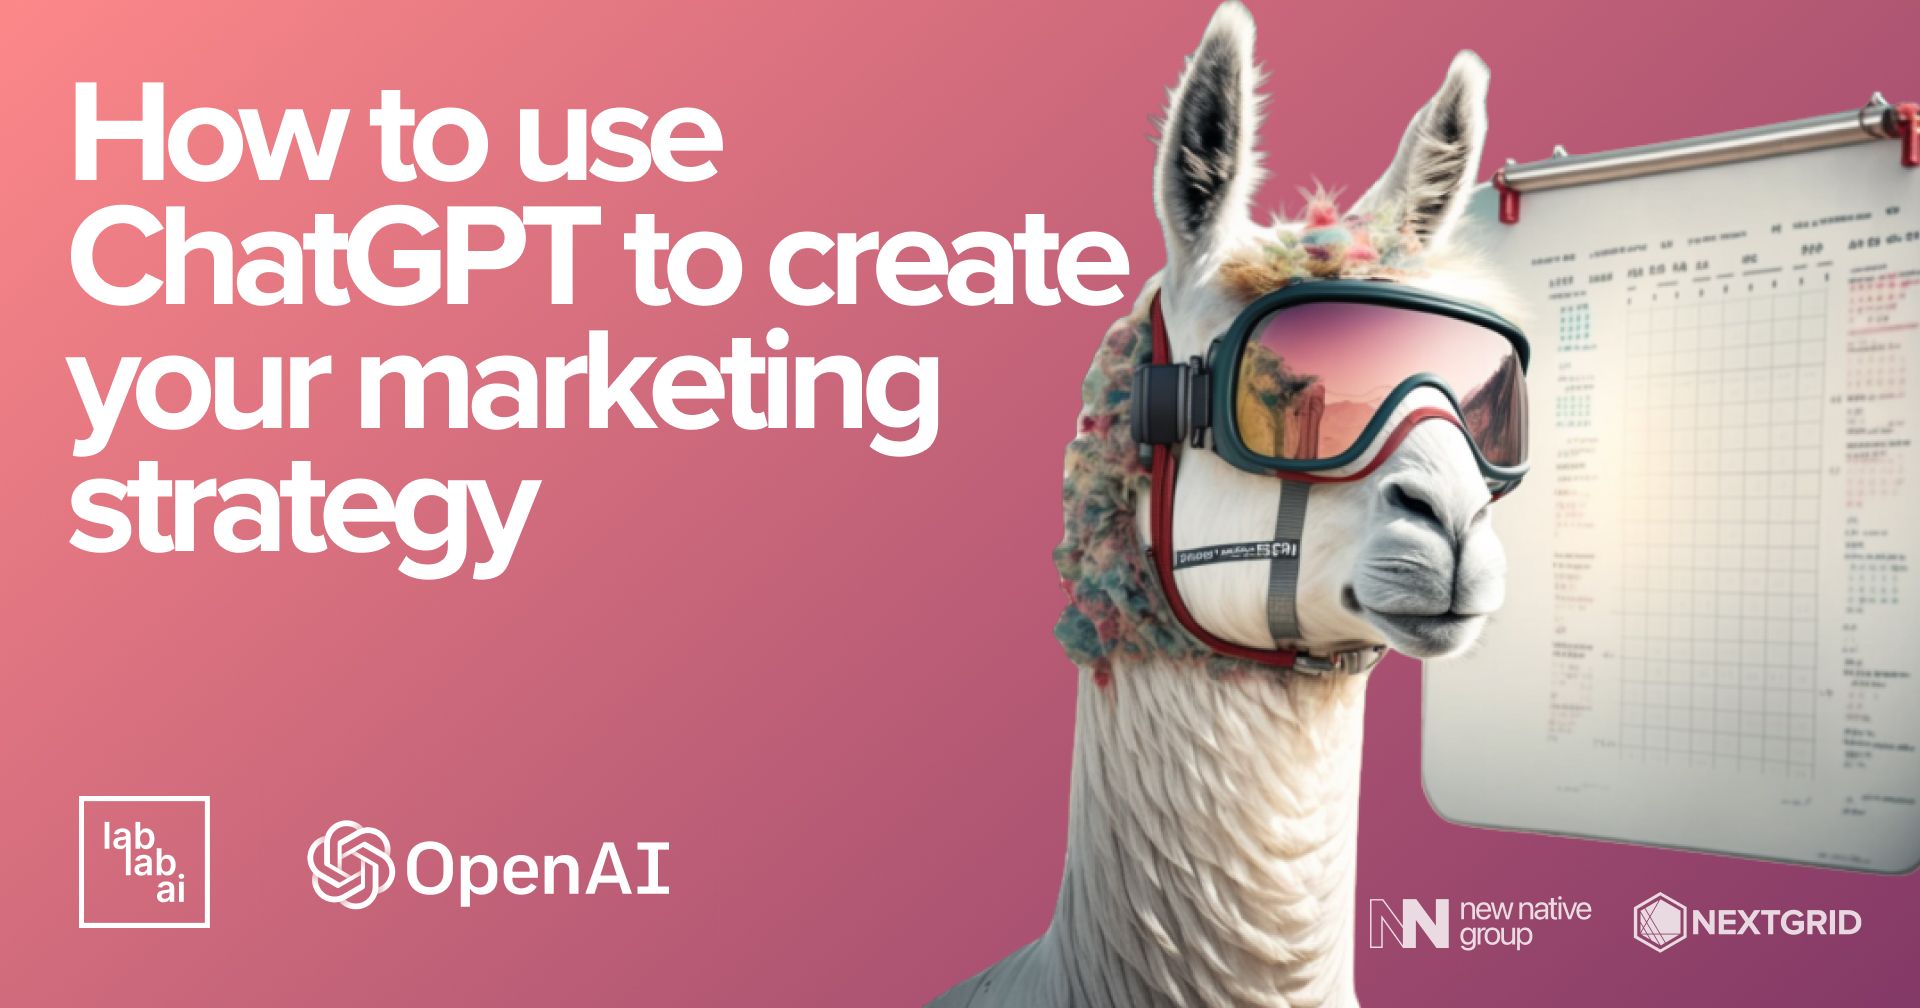 ChatGPT tutorial: How to use ChatGPT to create your marketing strategy